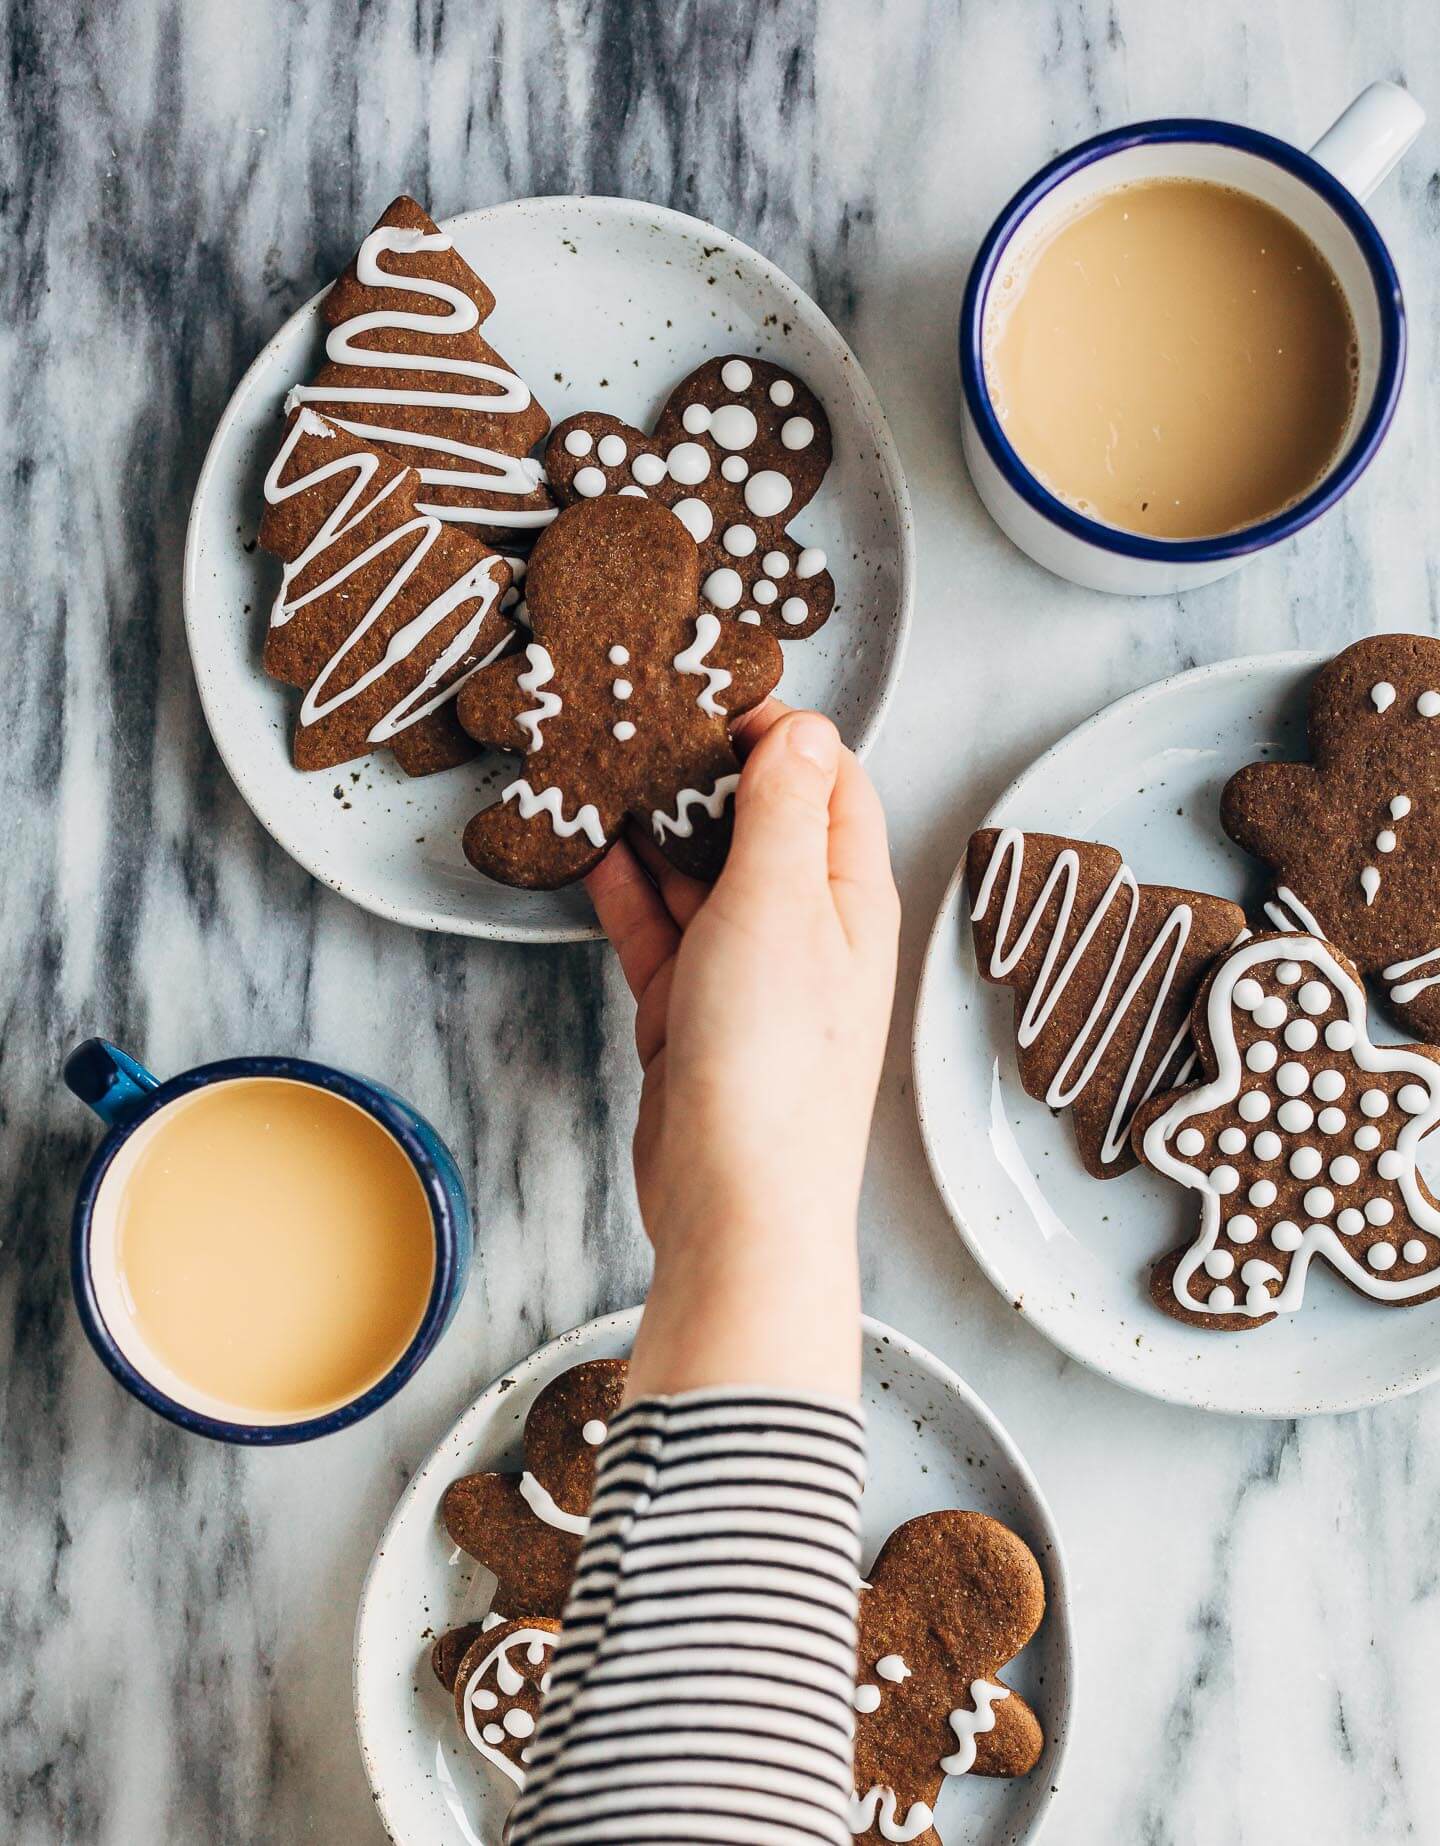 These spiced gingerbread cookies with lemon icing are perfectly sweet, with lots of depth from molasses and heat from a mix of cinnamon, chili powder, and fresh ground pepper. They're also really fun to make with kids. 